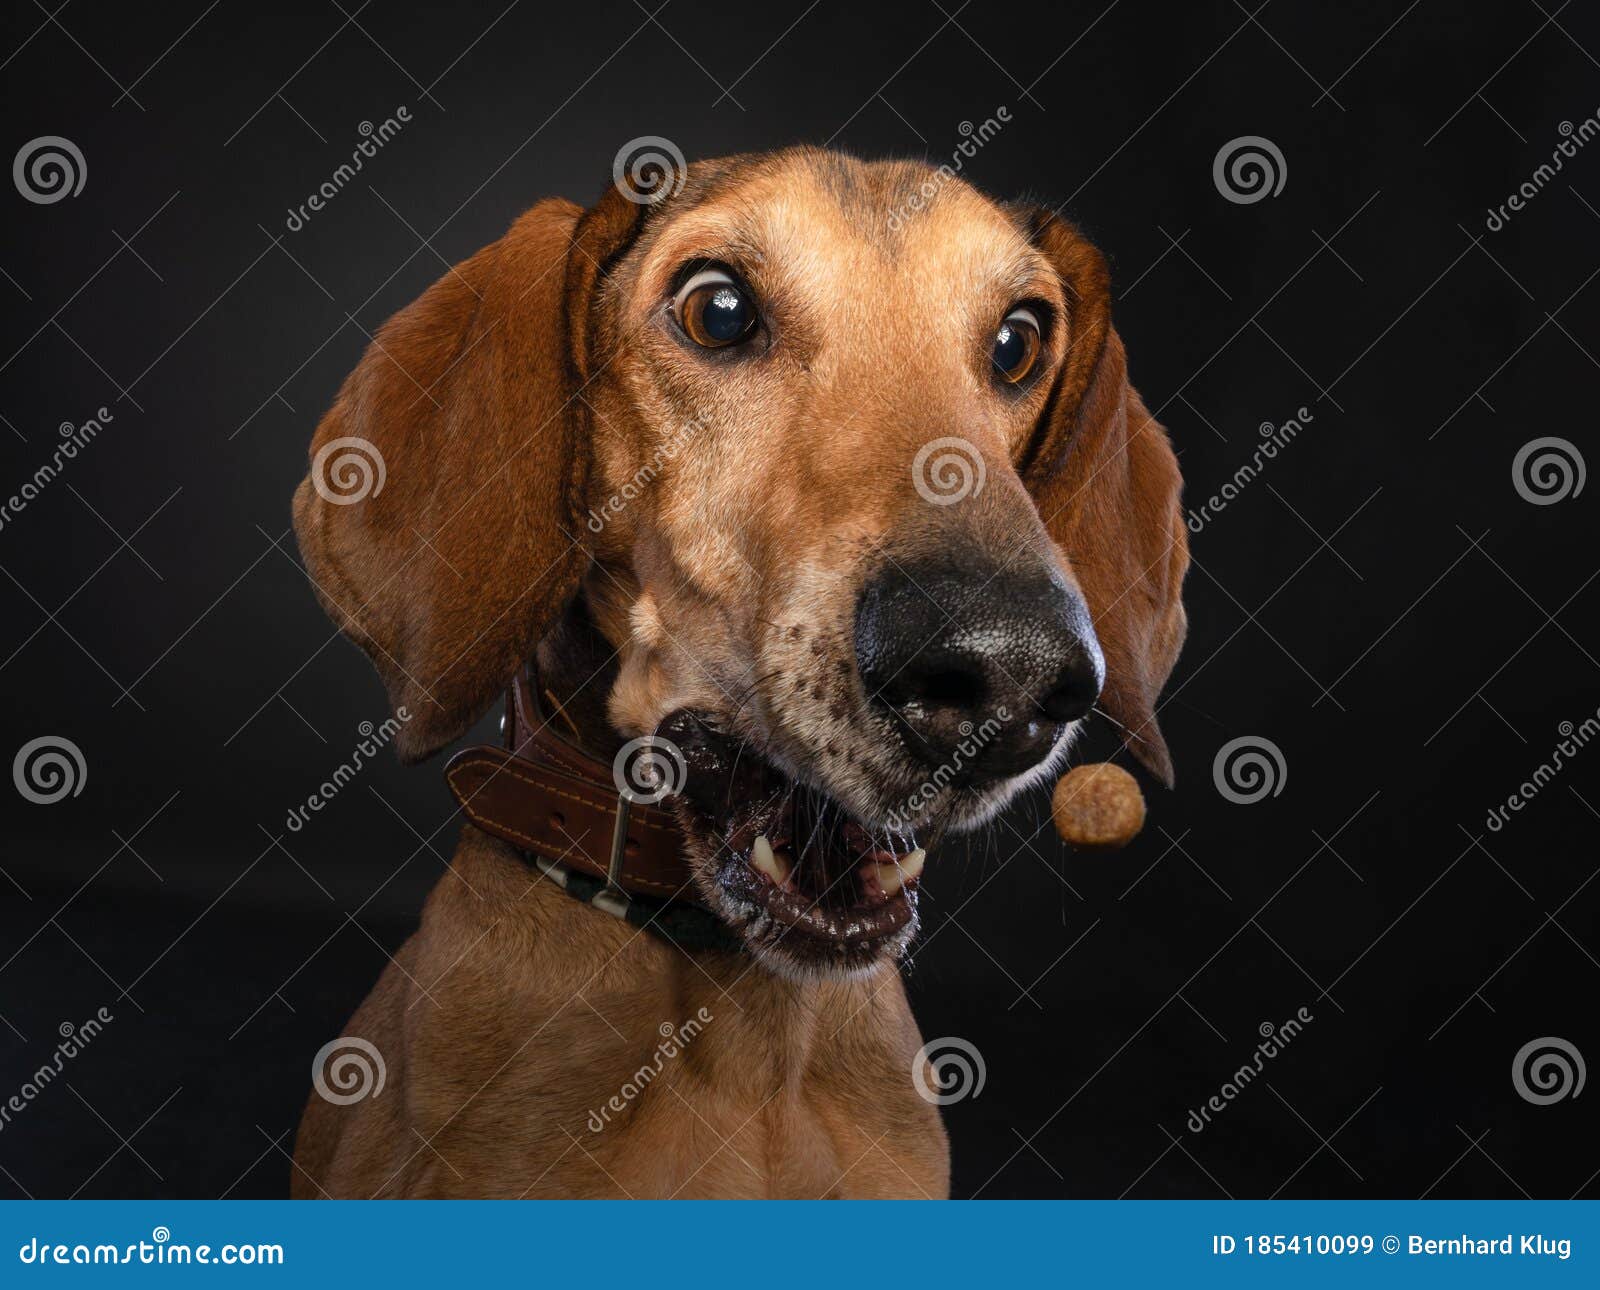 studio portrait of a brown dog making a funny face while catching a treat.